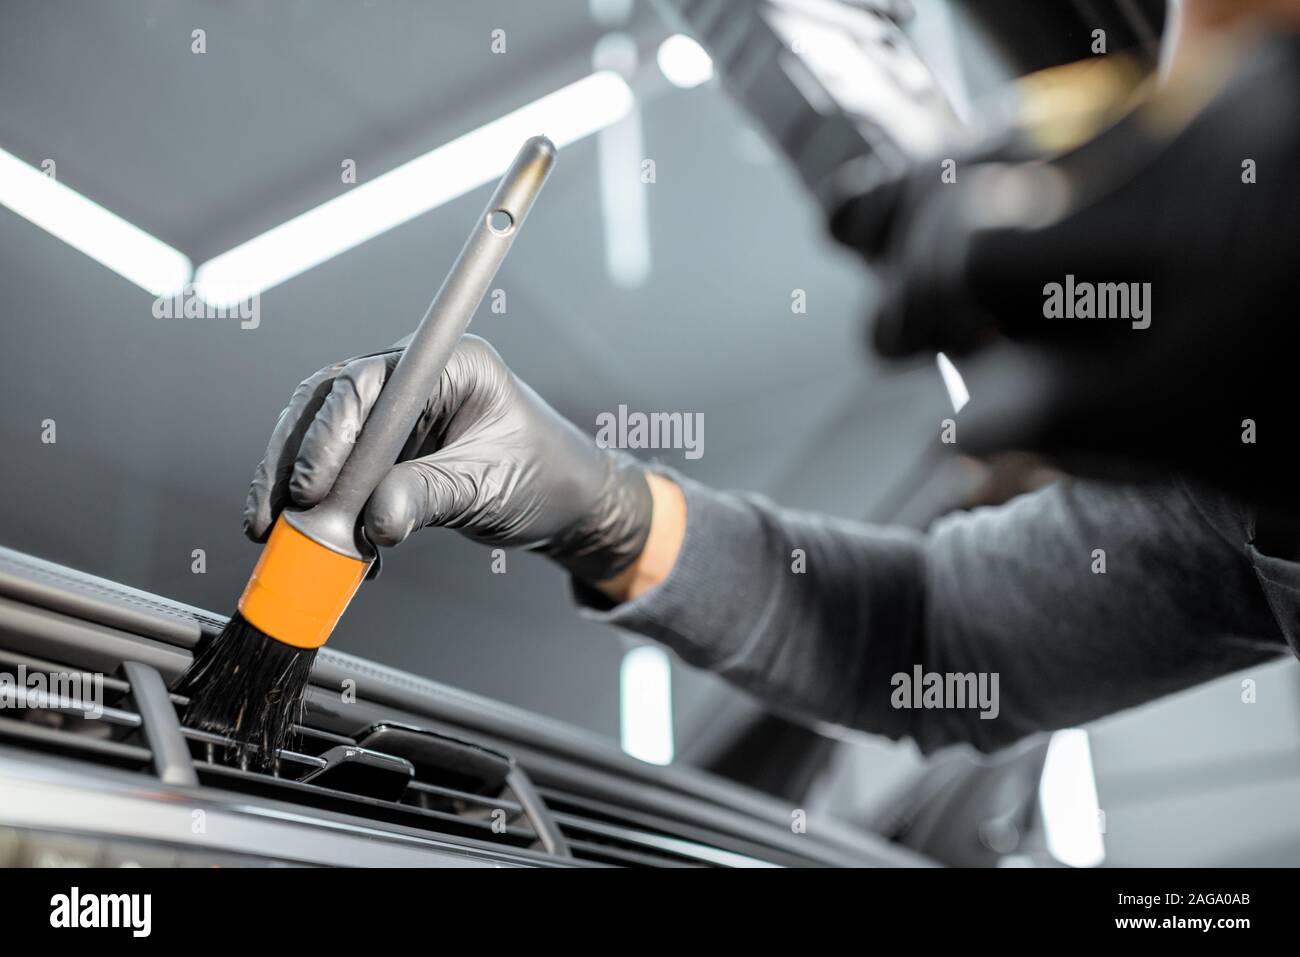 Worker provides a professional vehicle interior cleaning, wiping indoor front panel with a brush at the car service station, close-up Stock Photo